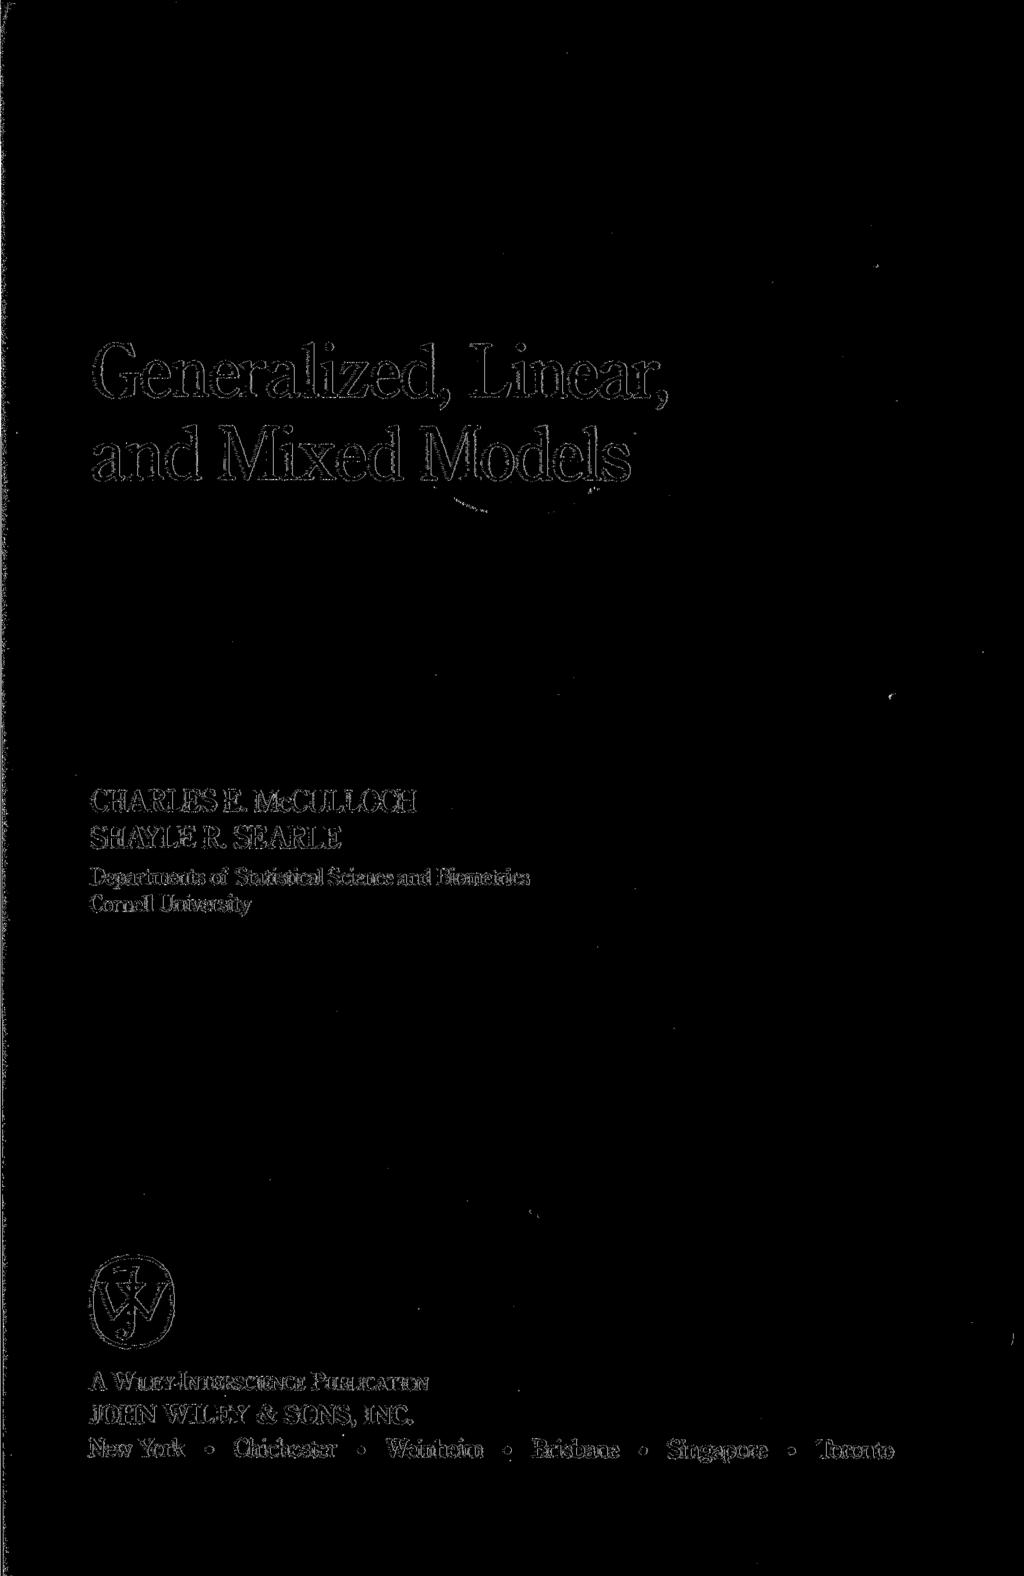 Generalized, Linear, and Mixed Models CHARLES E. McCULLOCH SHAYLER.